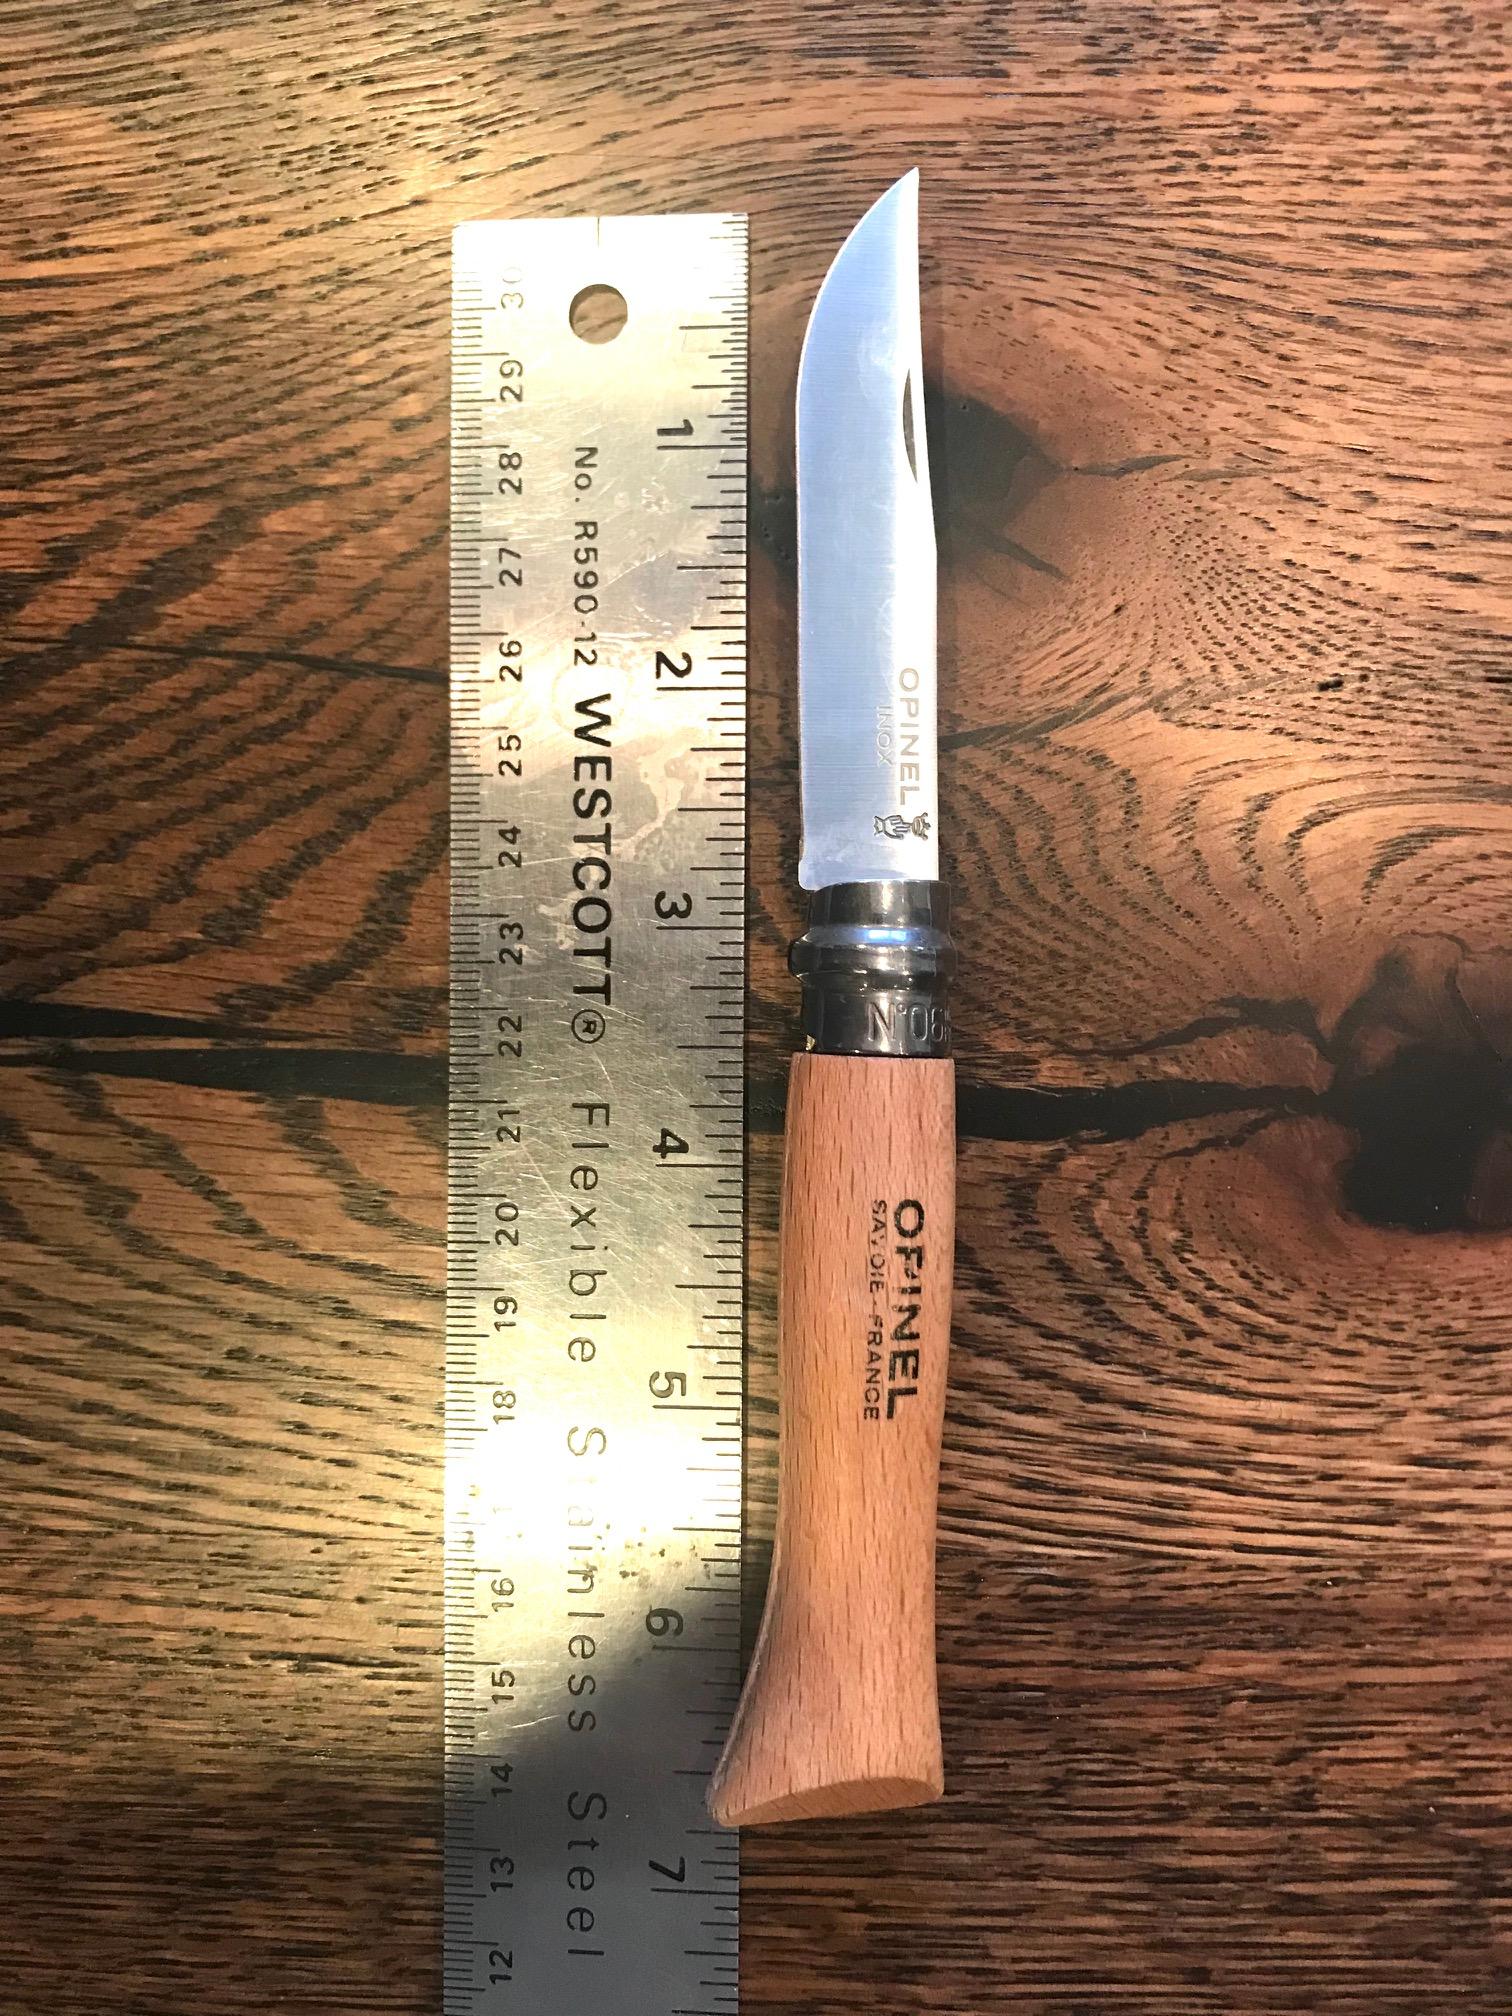 $7 Ceramic Knife 1.03 oz/29.19 gm with 3 Blade - Backpacking Light